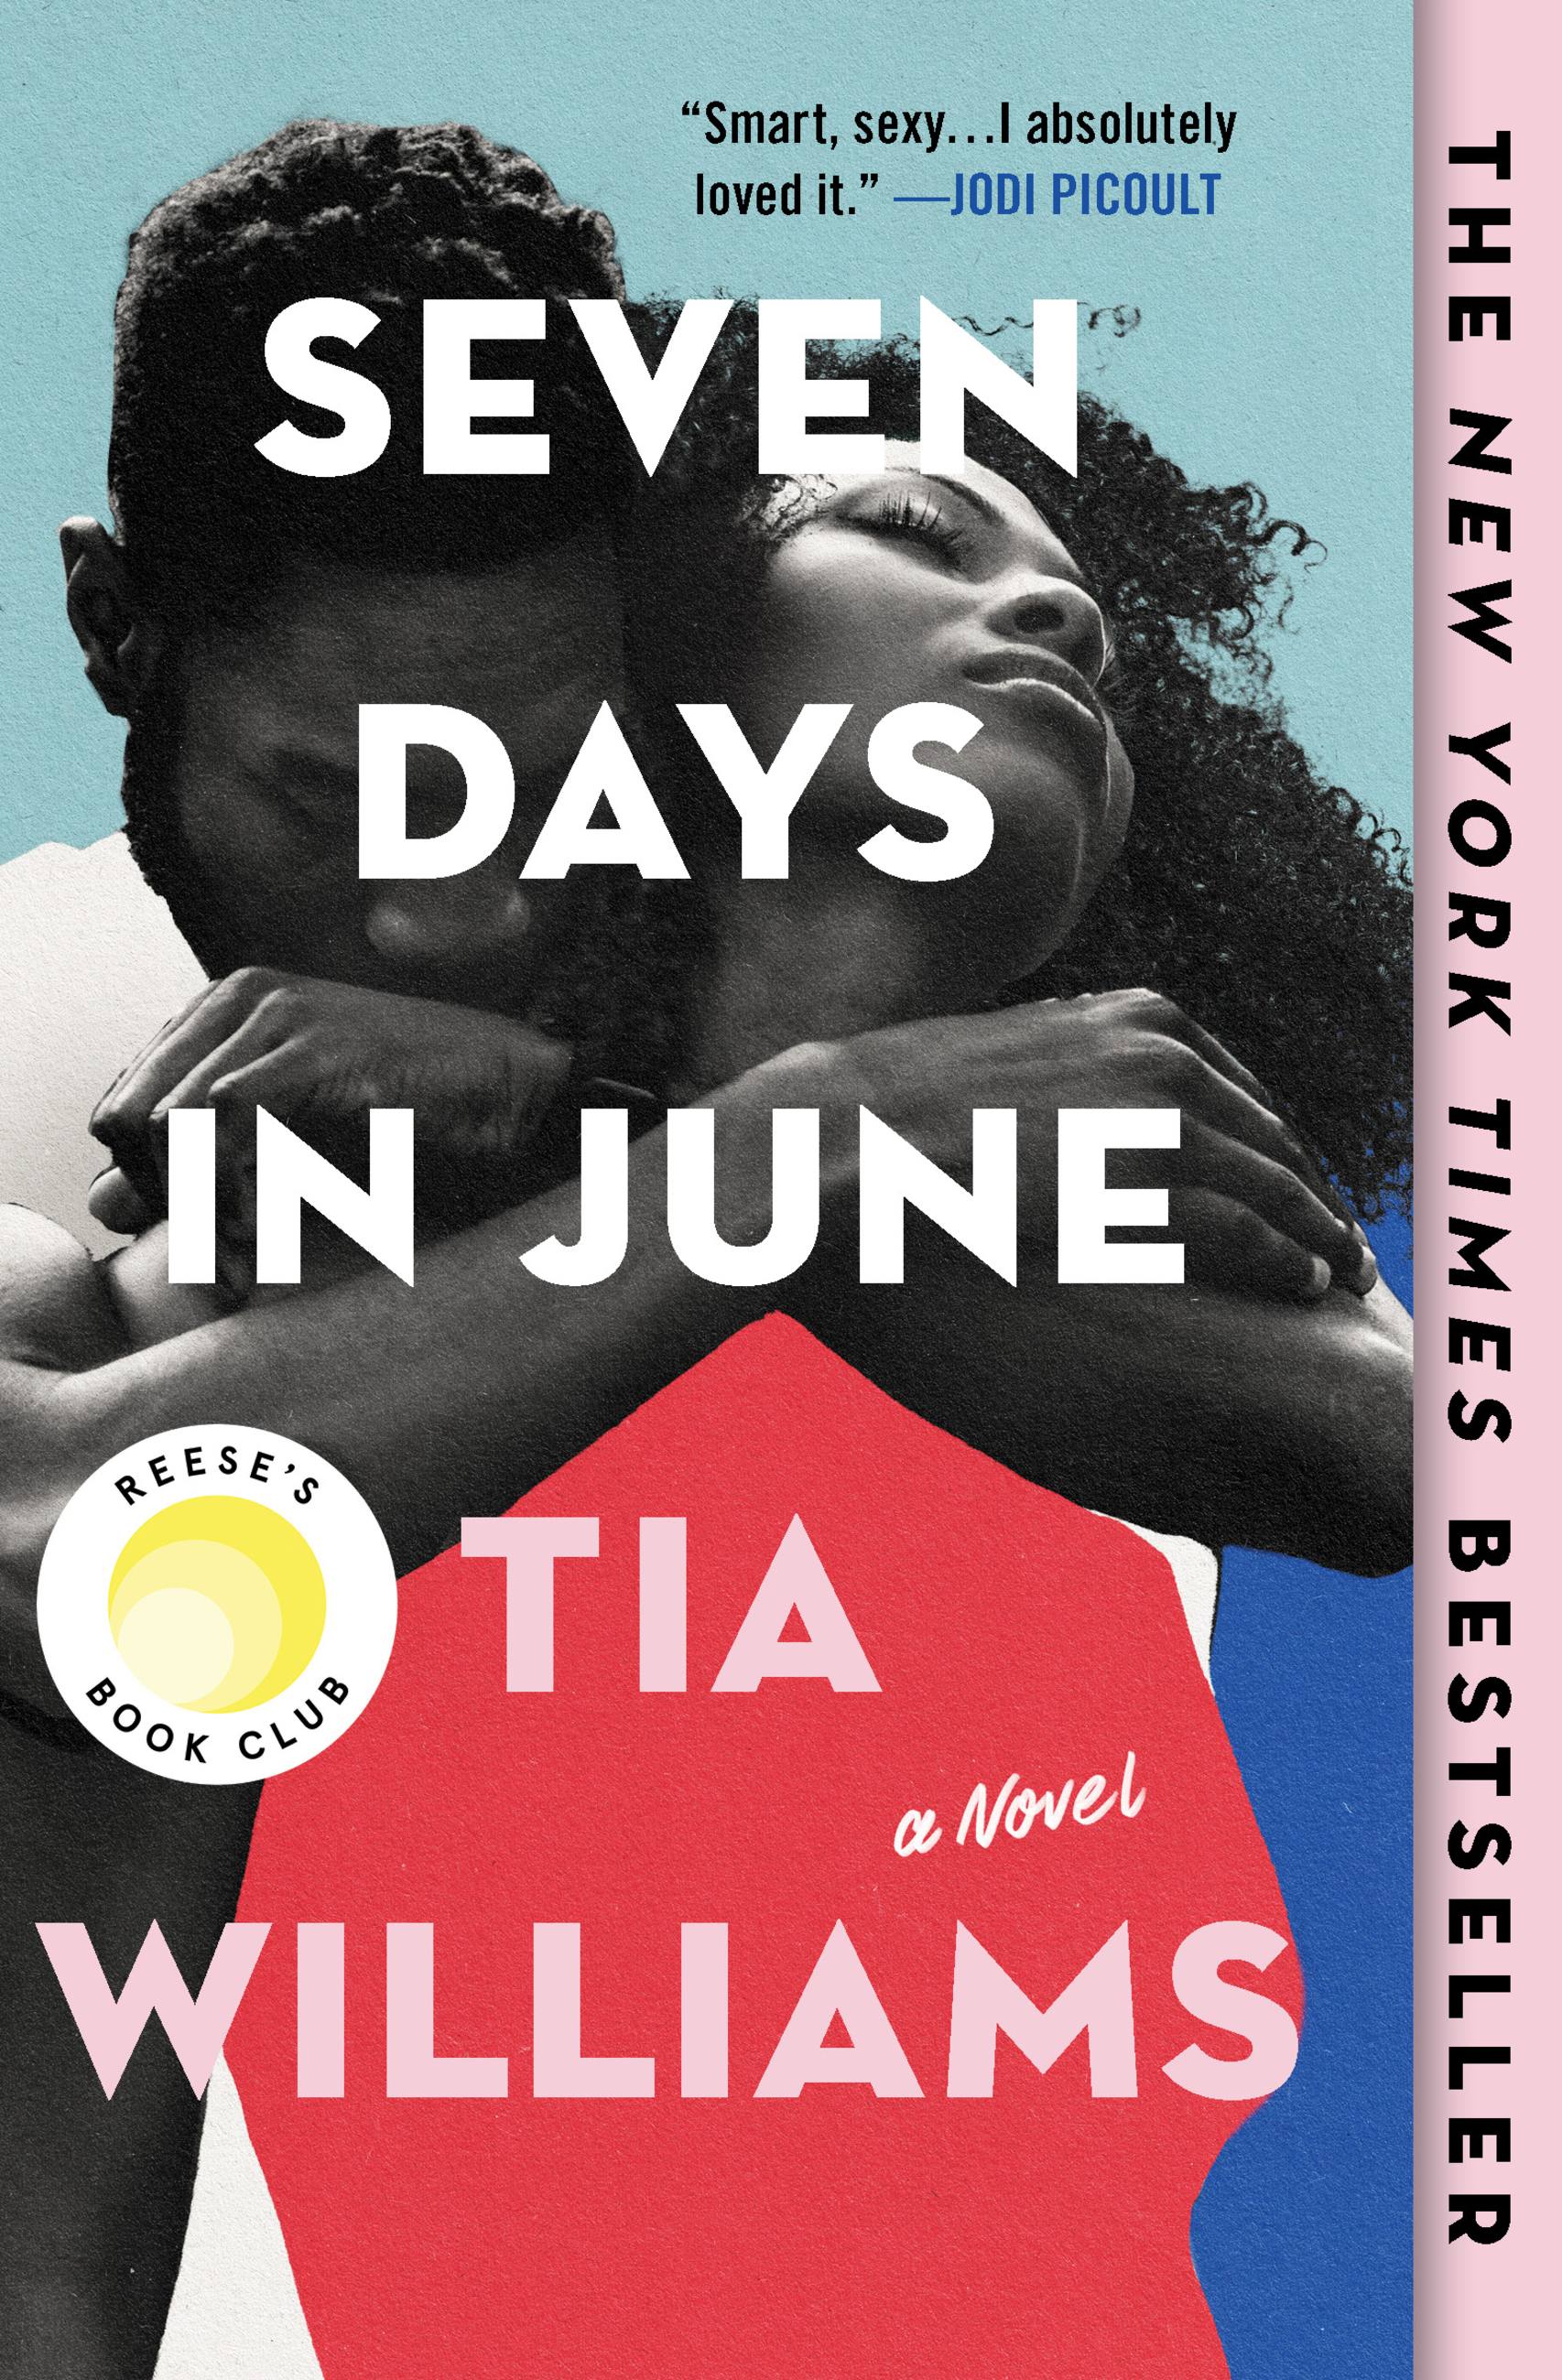 Petite Girl Porn Group - Seven Days in June by Tia Williams | Hachette Book Group